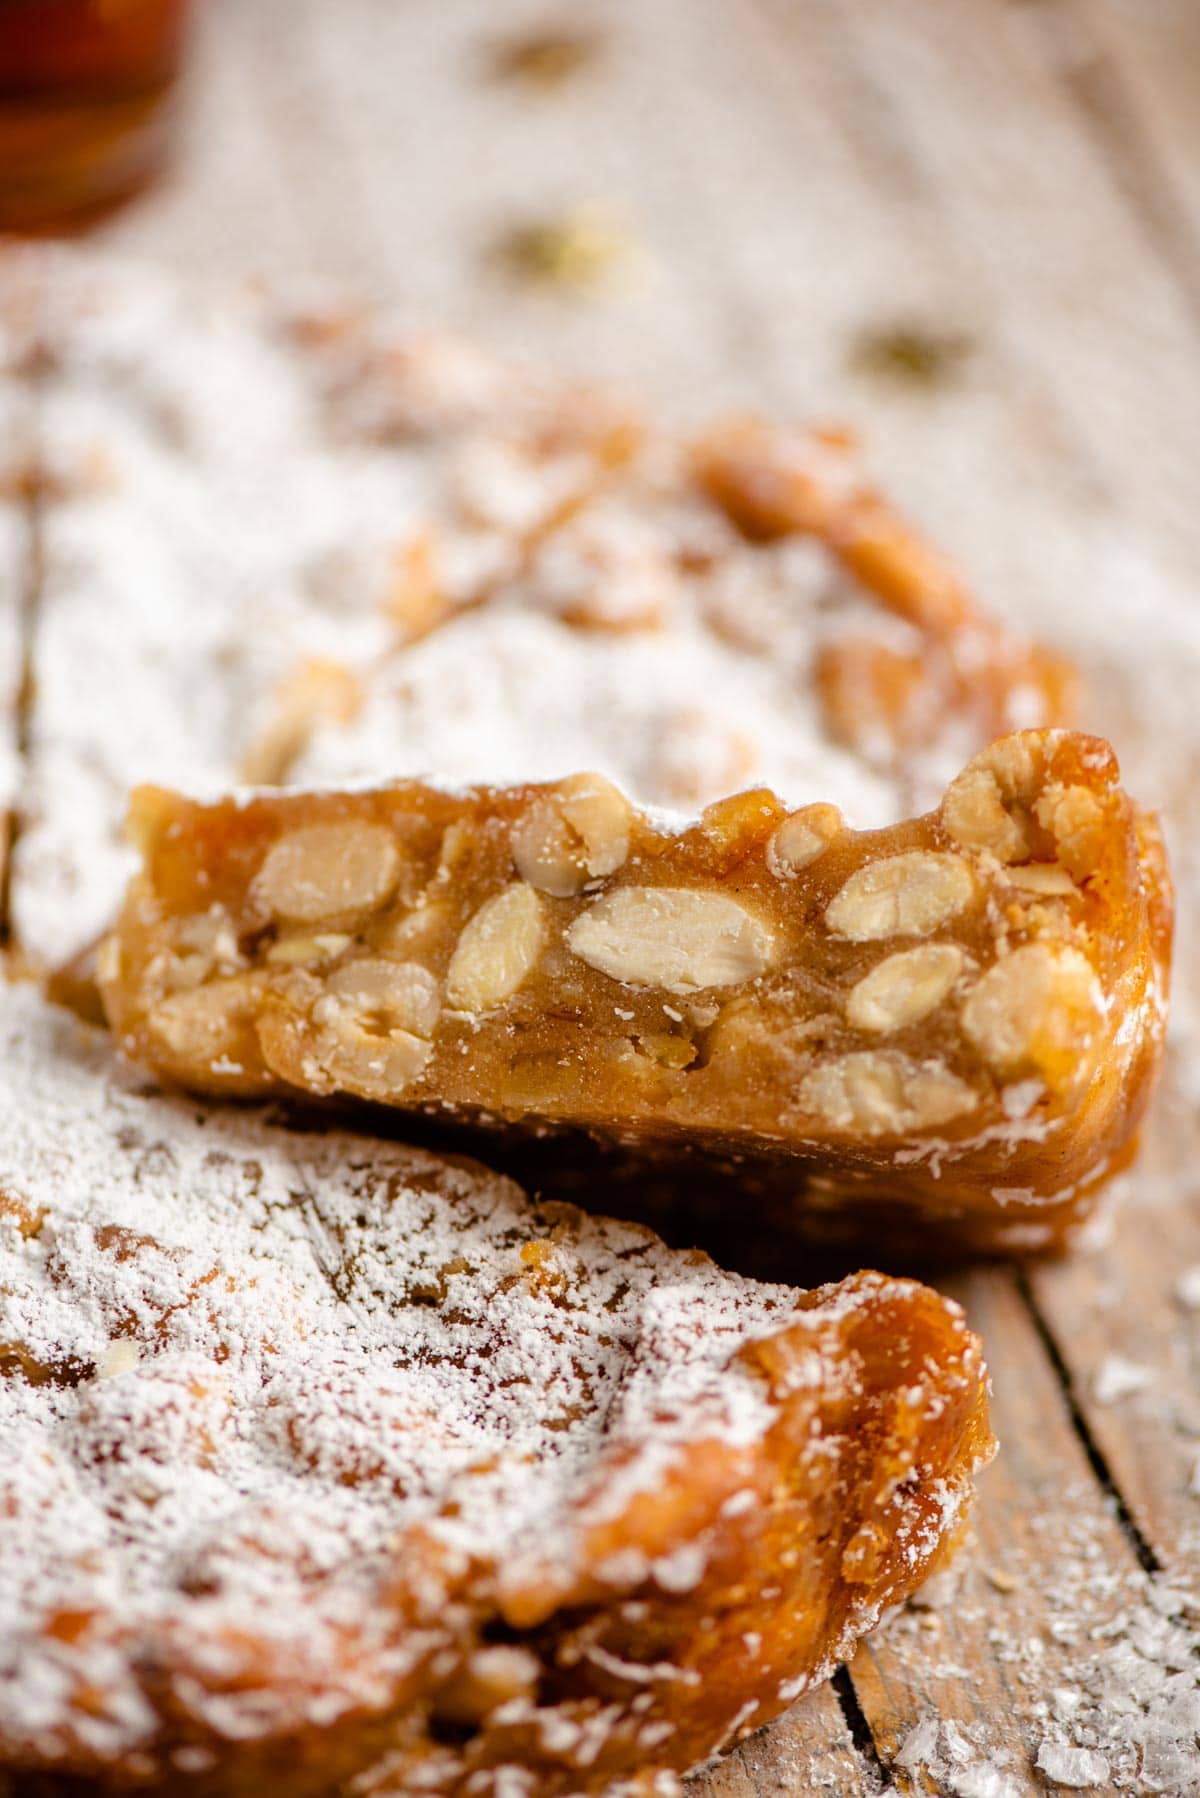 A close up of a cut slice on panforte showing all the nuts and fruit inside